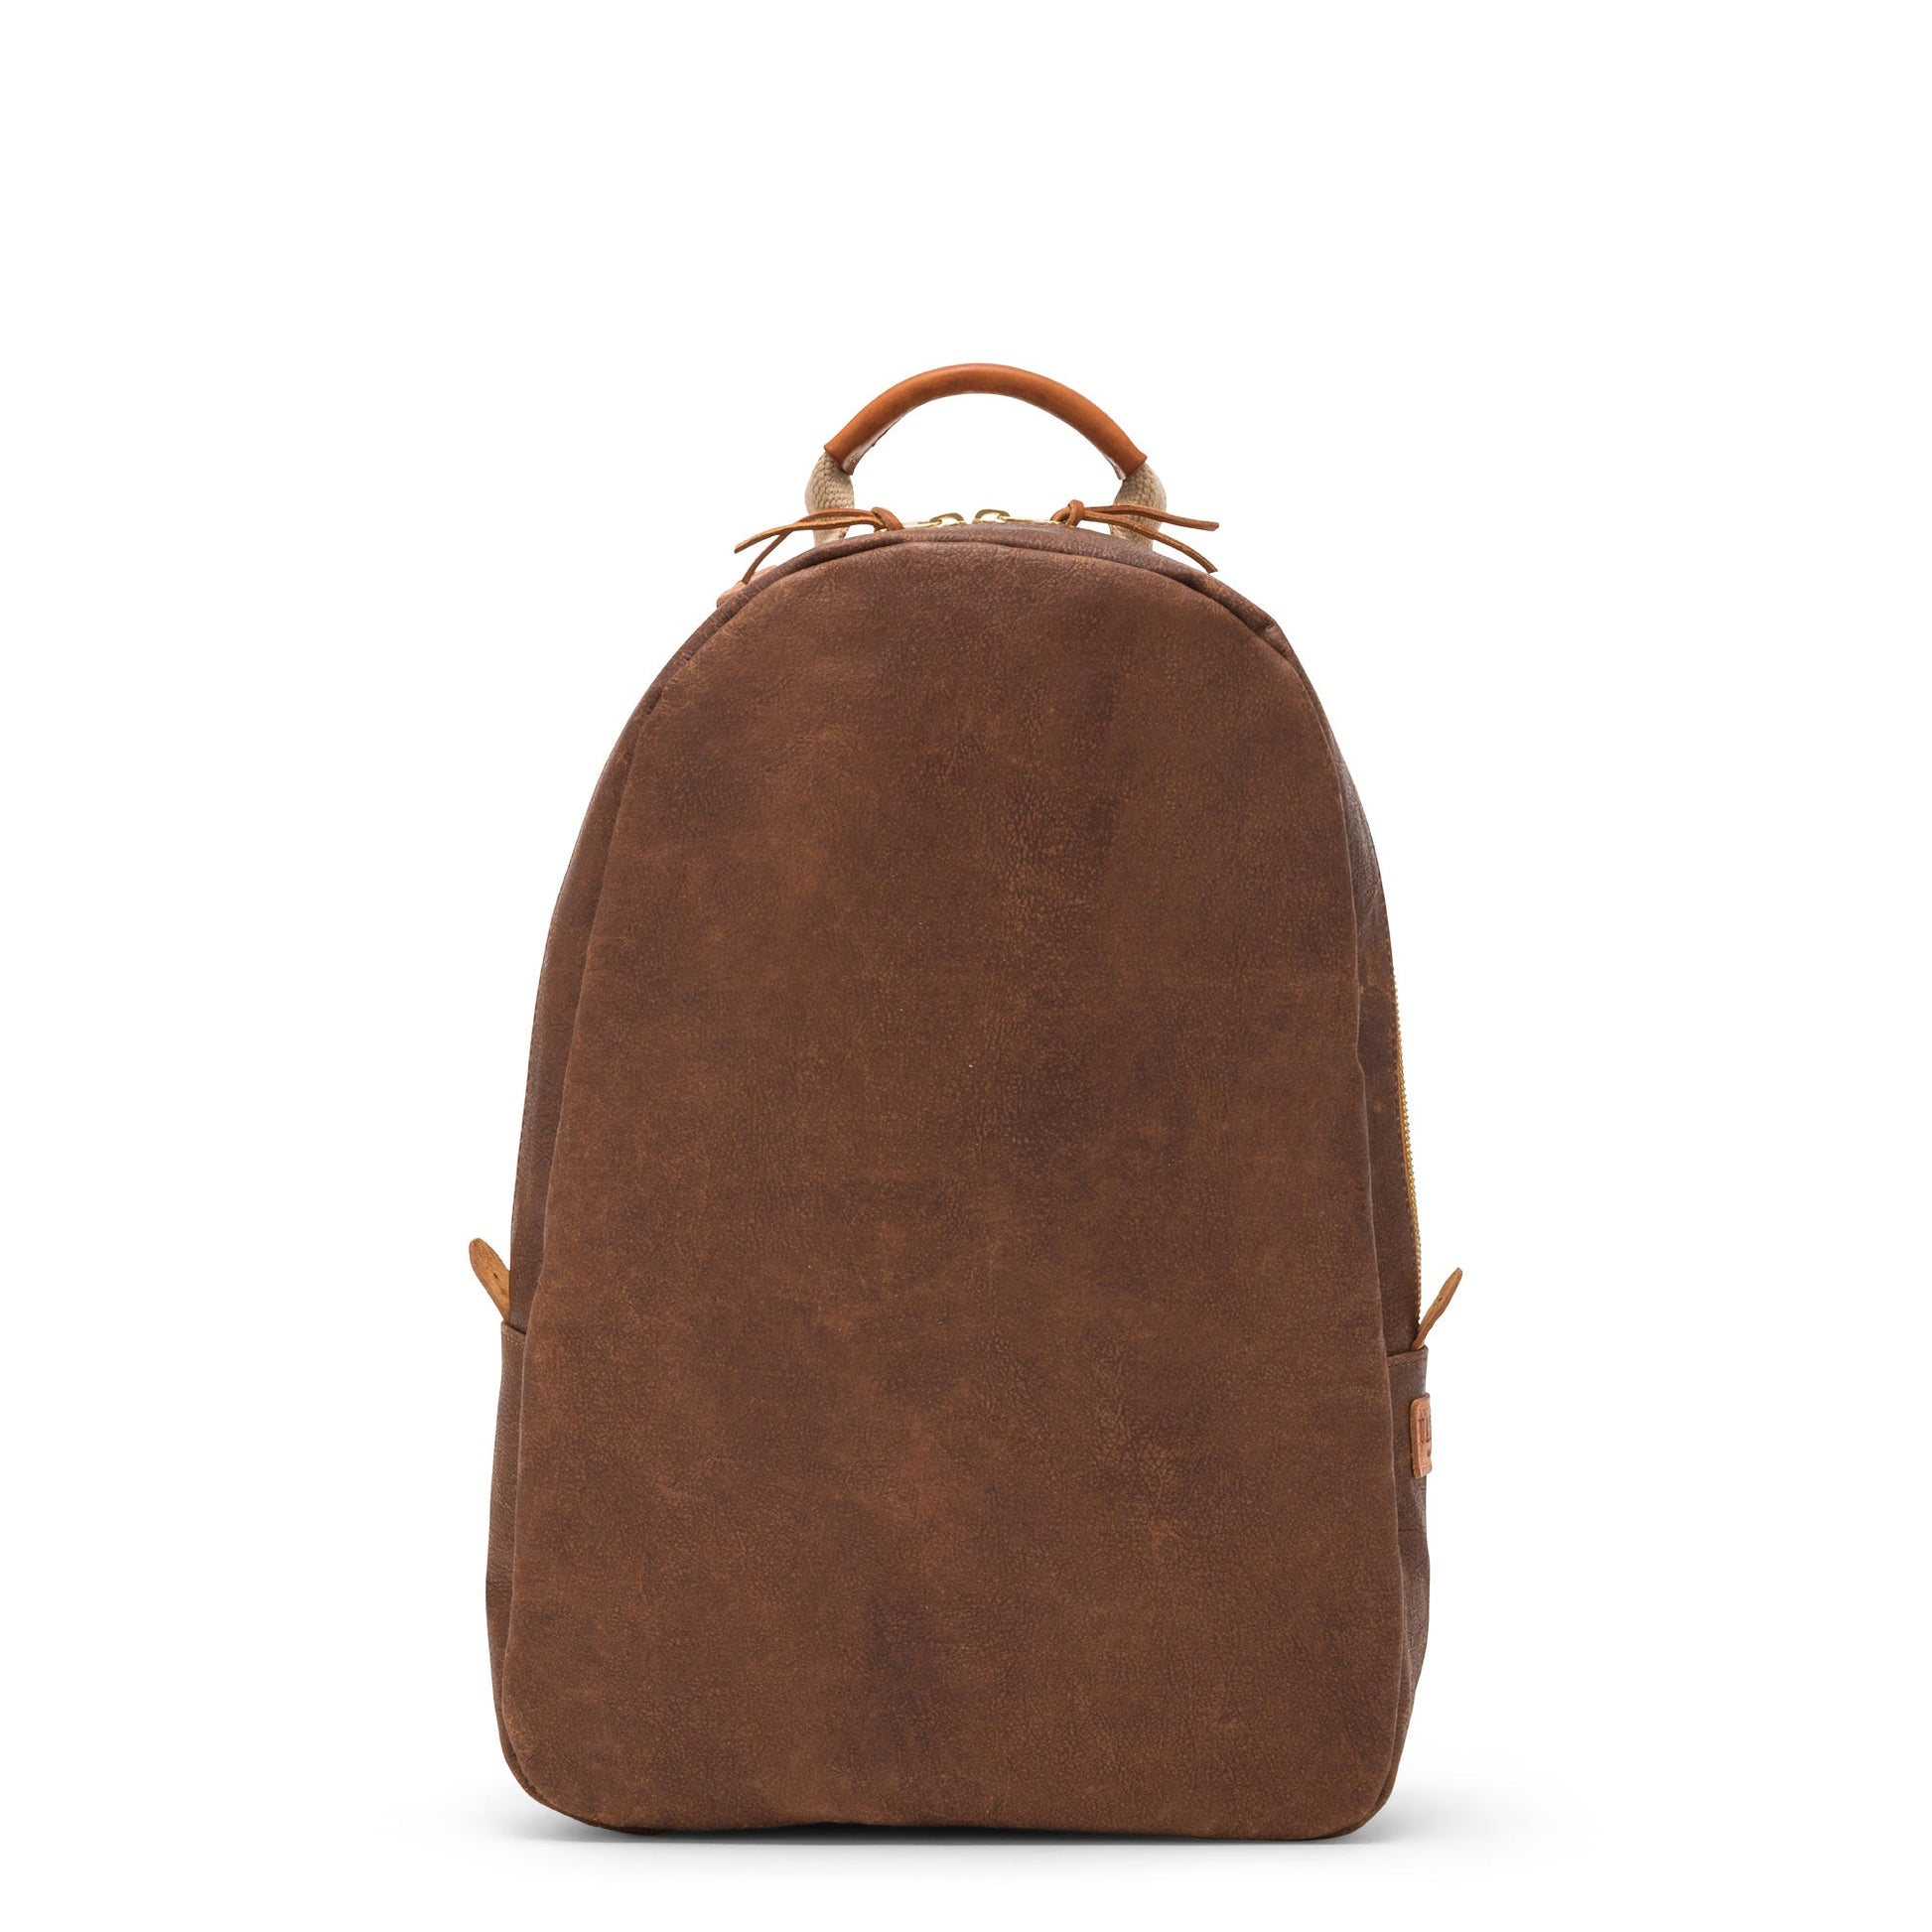 A washable paper backpack is shown from the front angle. It features a top handle, it is oval in shape, and it is brown in colour.